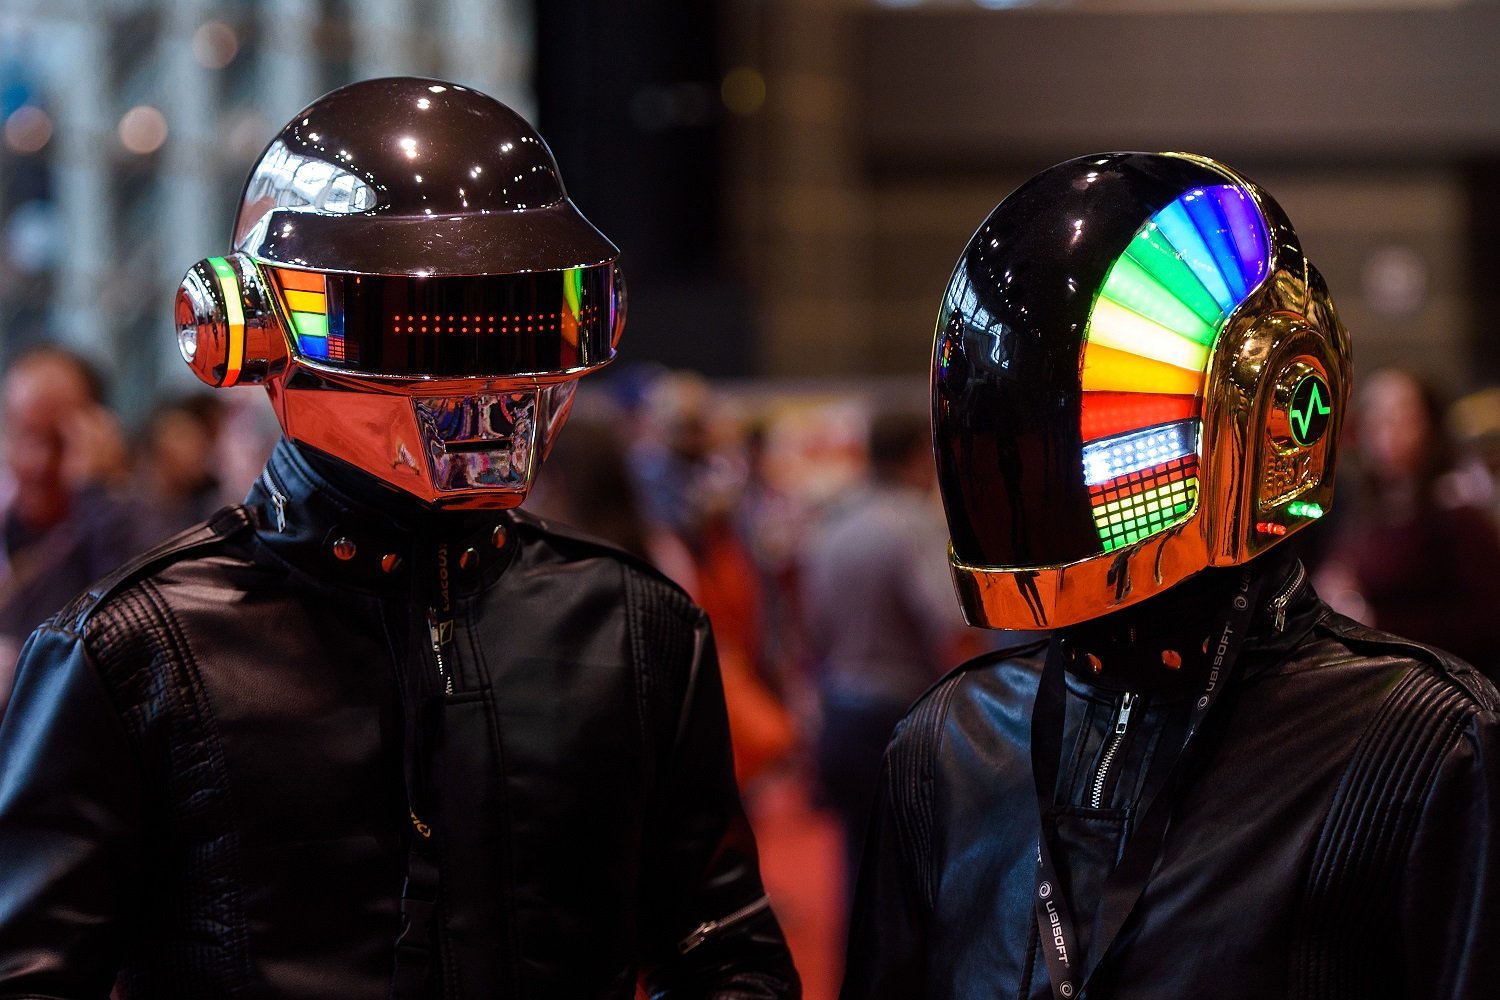 Cosplayers dressed as Daft Punk